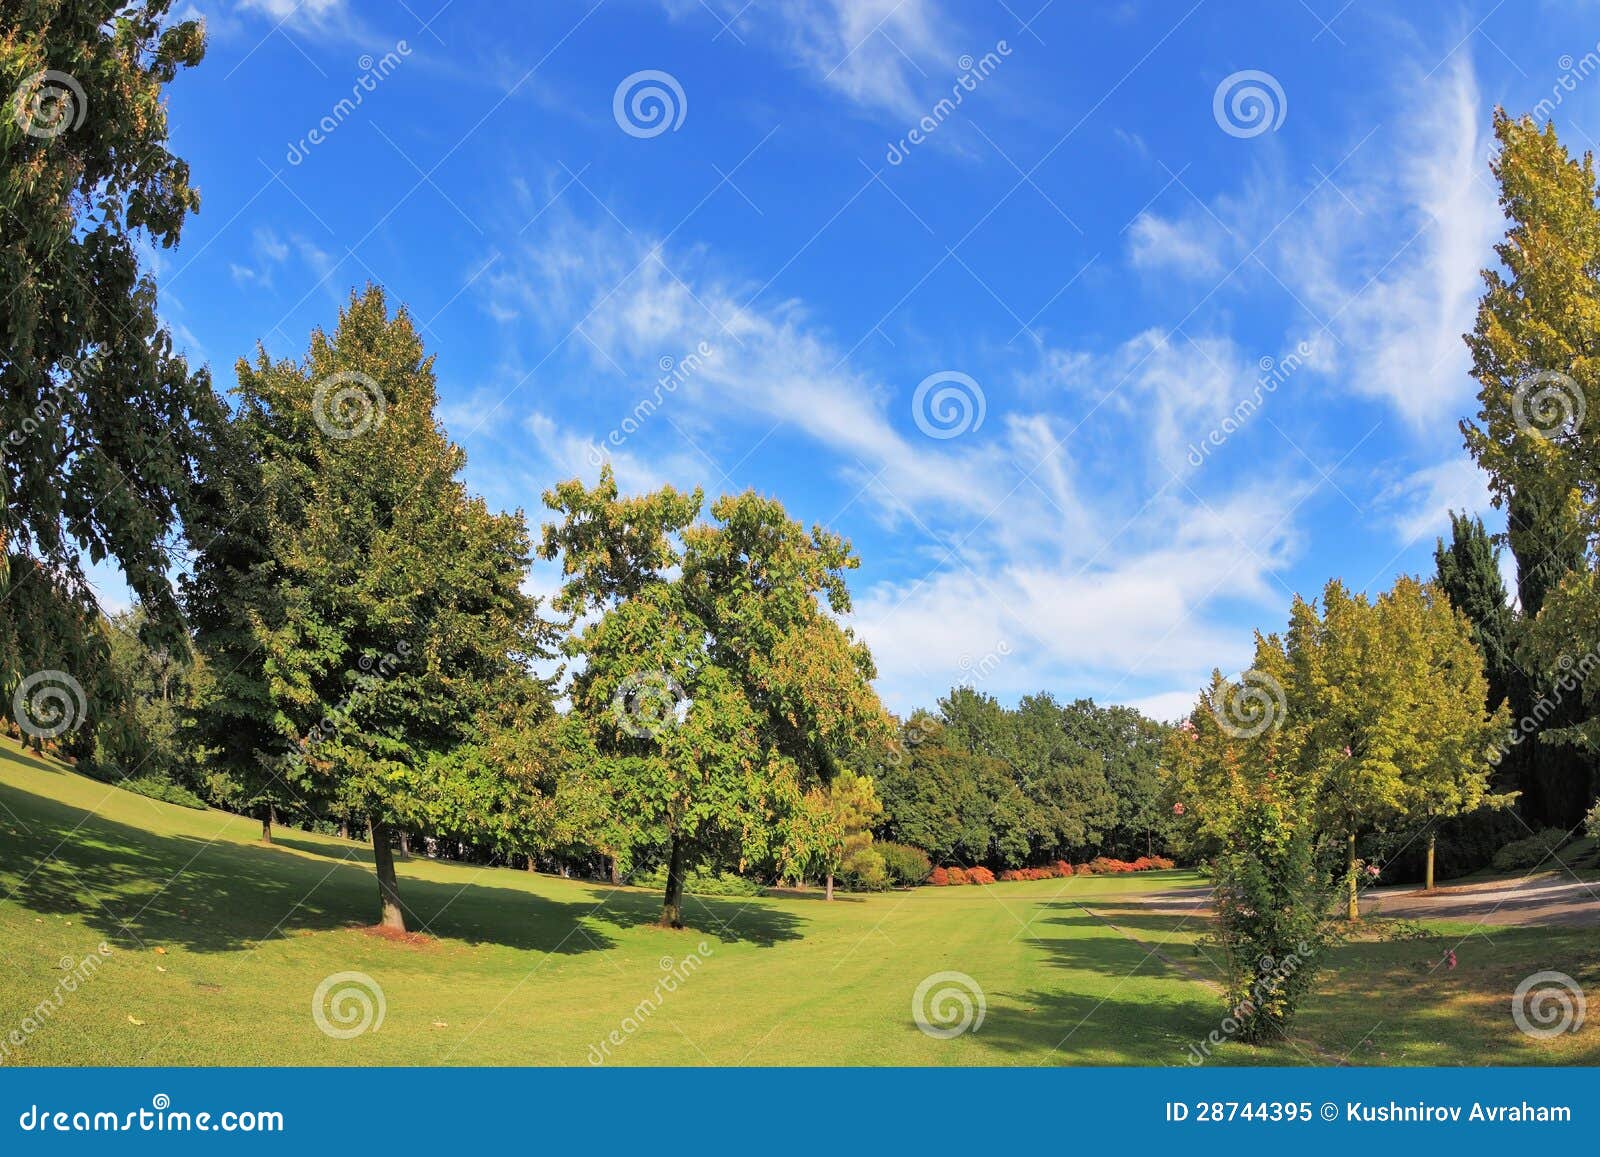 Magnificent Park in Northern Italy in Wonderful Summer Day Stock Image ...